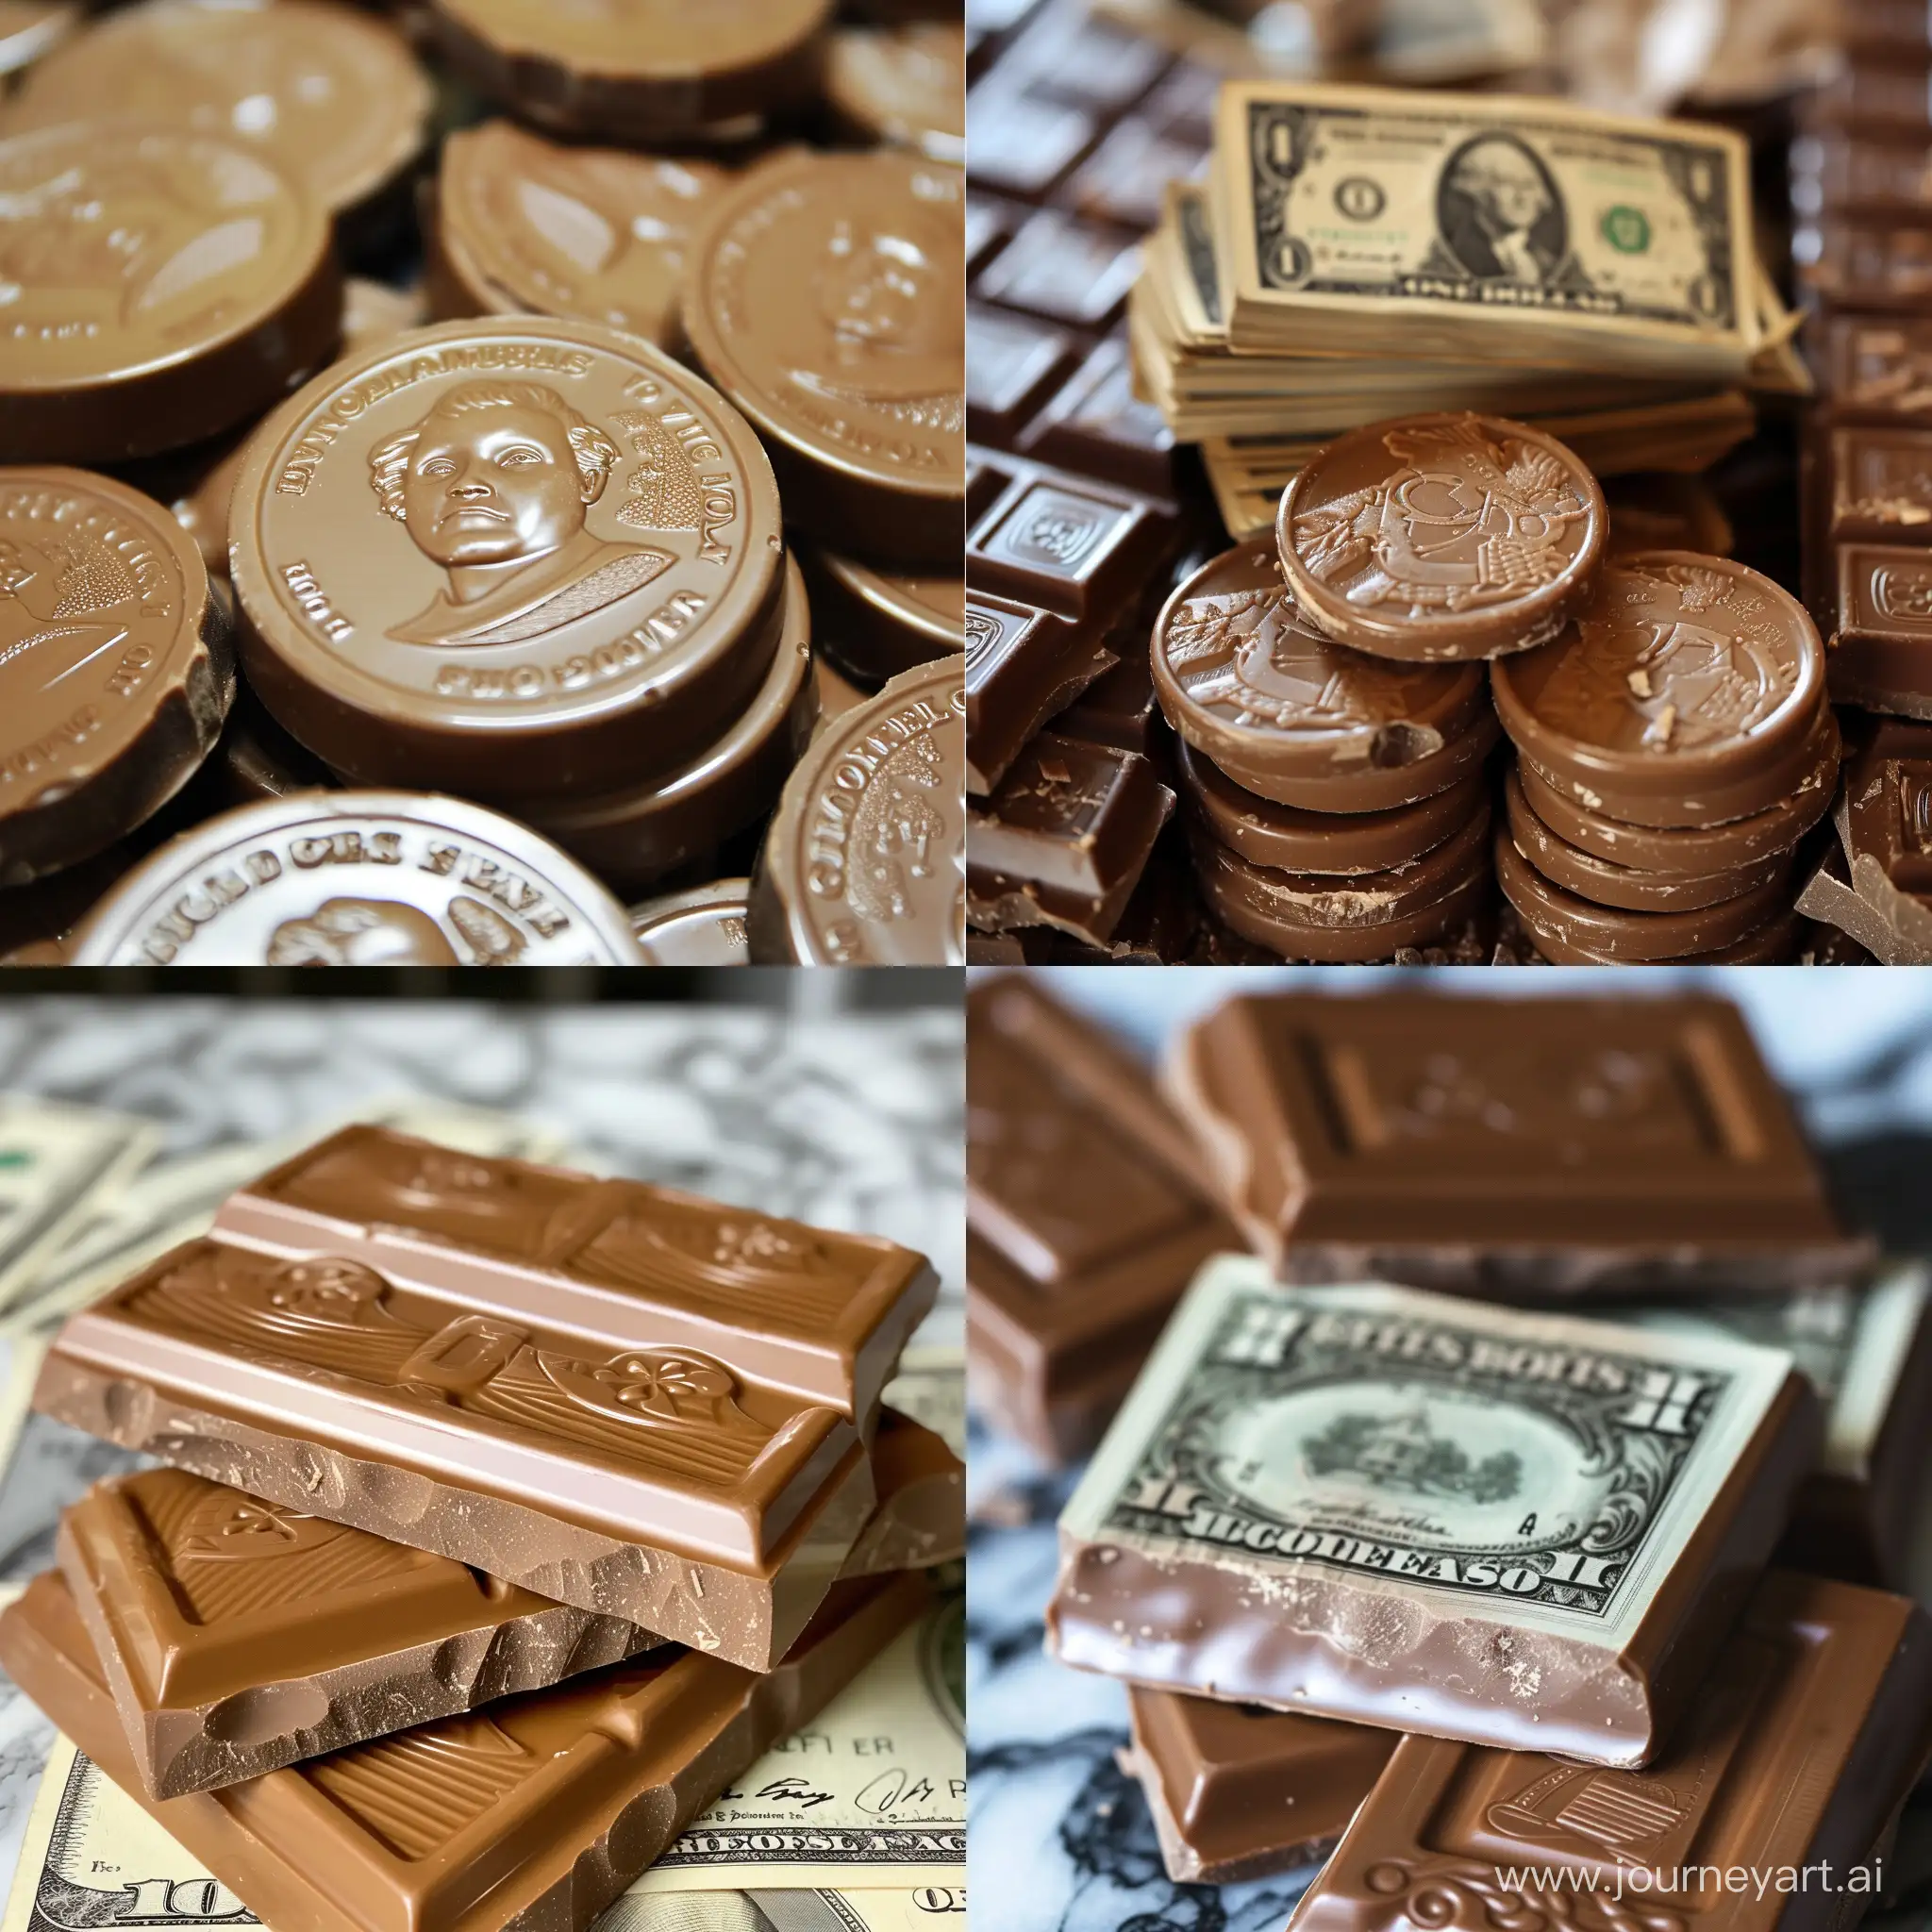 Children-Playing-with-Chocolate-Coins-in-a-Joyful-Celebration